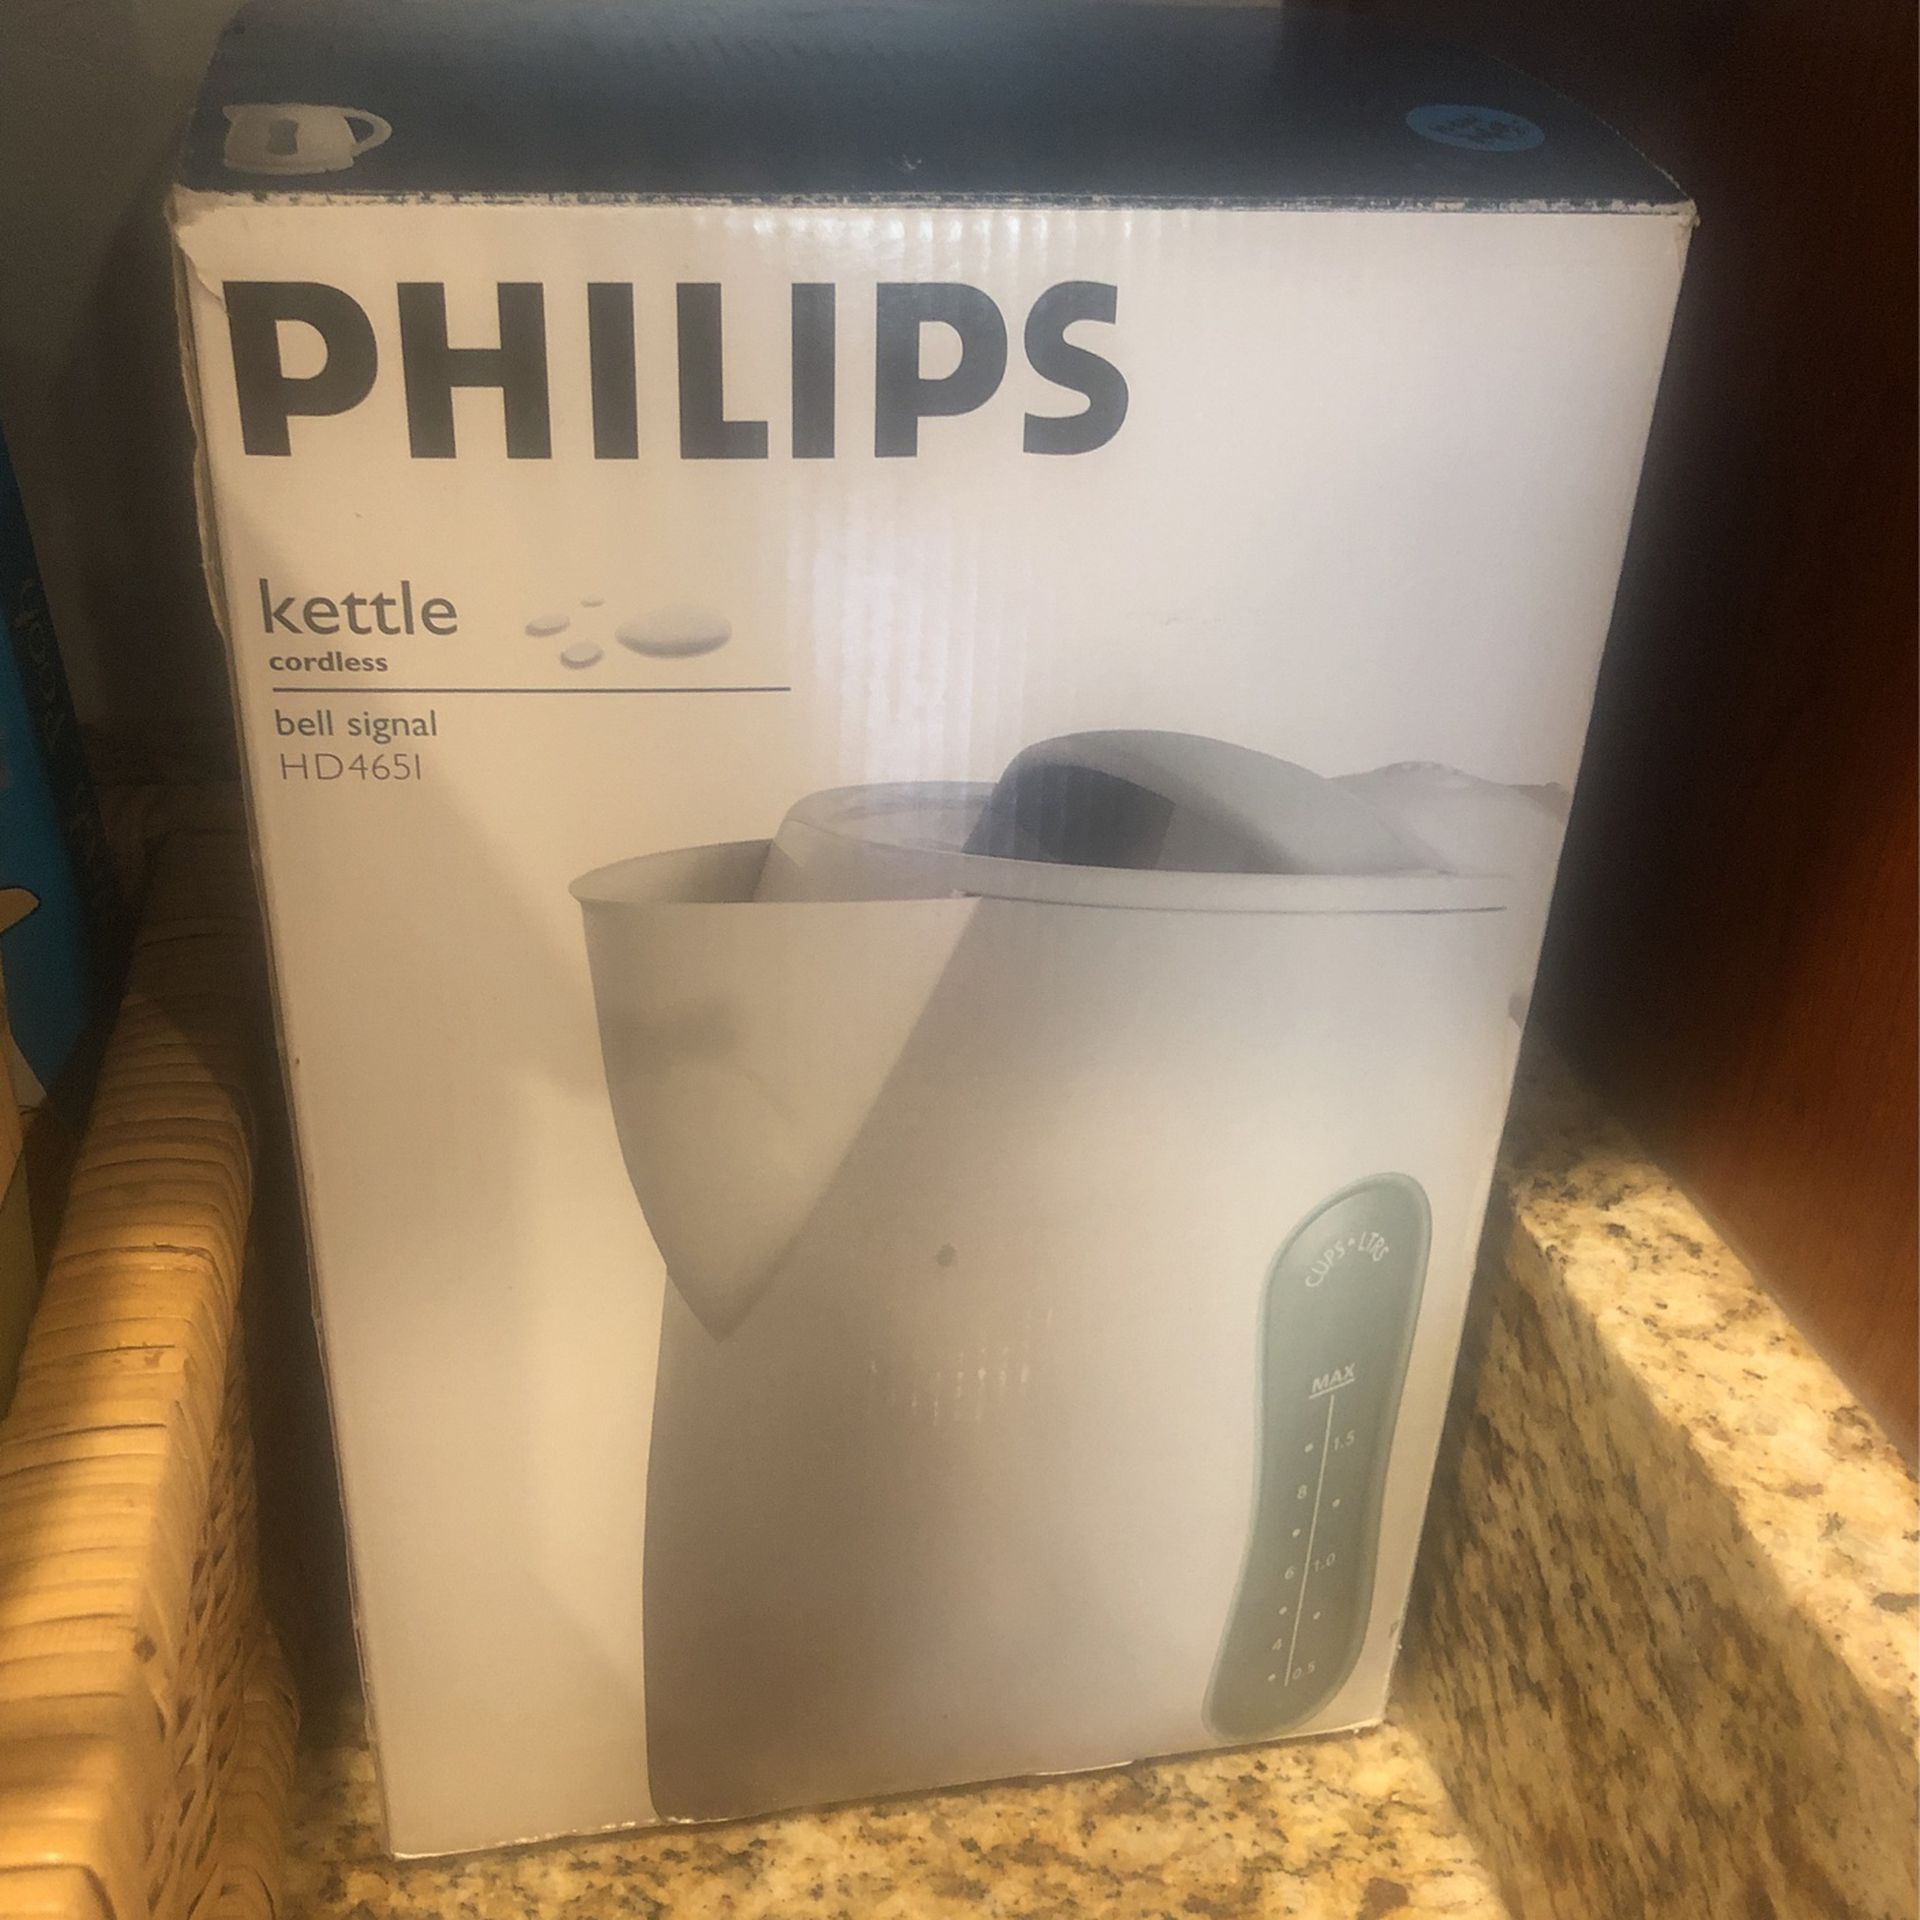   New Phillips cordless kettle  10 Cups .  Gift   Office Use  Church Use   